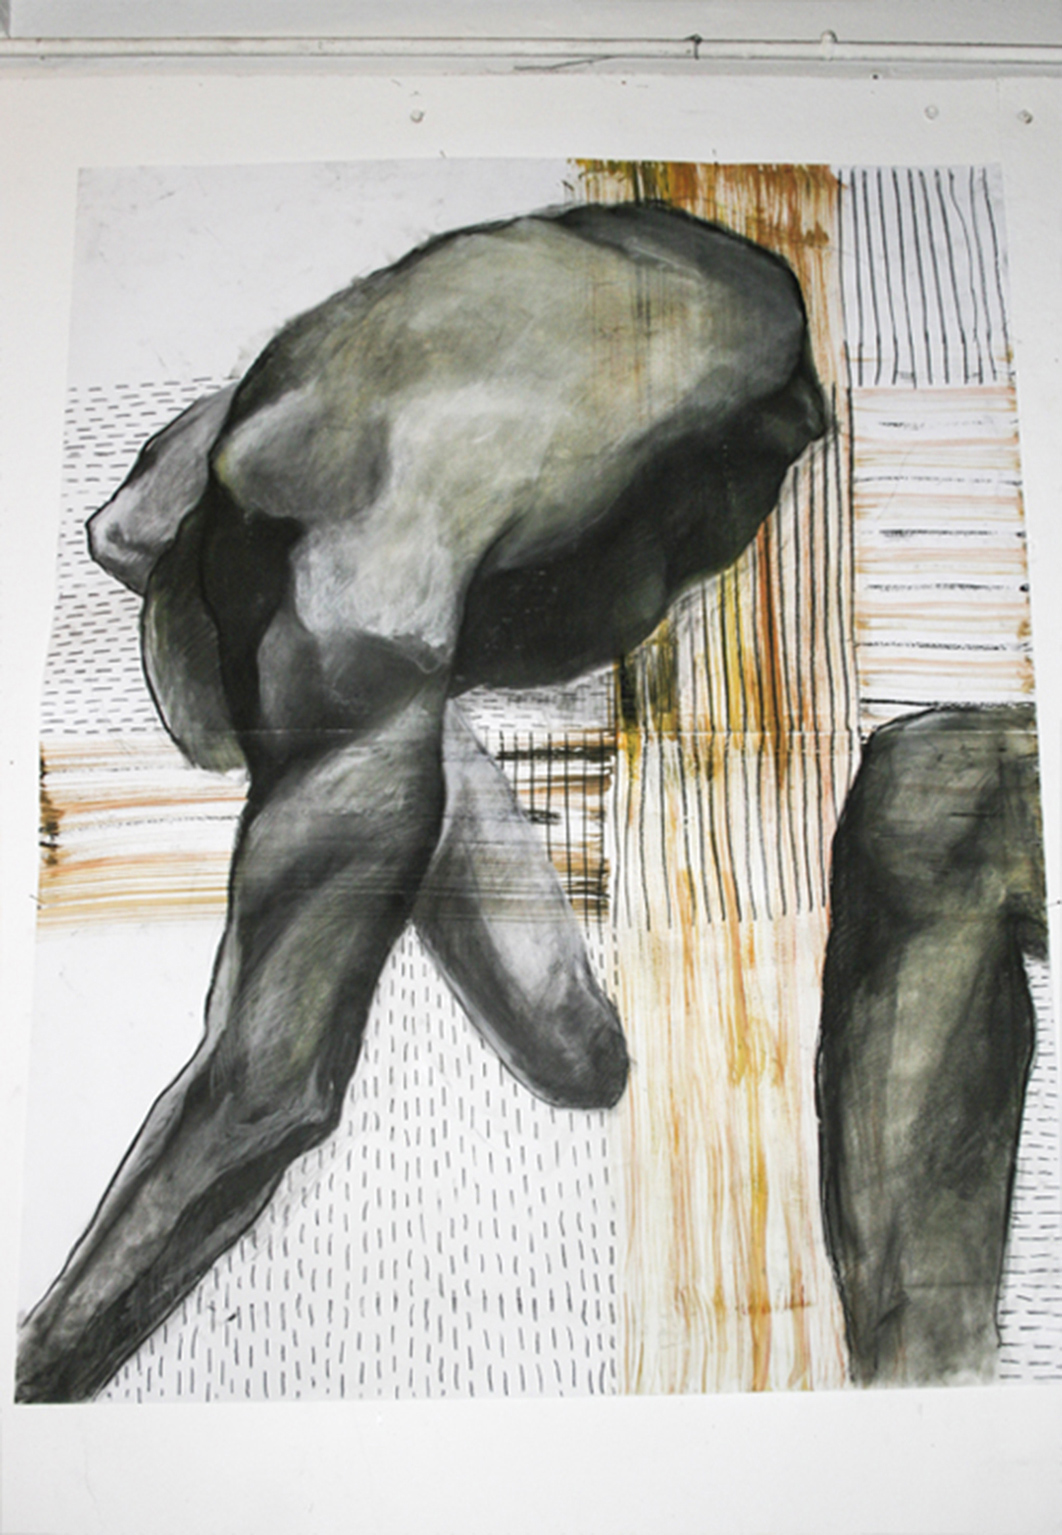 drawings, paintings, abstract, aesthetic, figurative, illustrative, portraiture, bodies, patterns, sexuality, black, brown, white, acrylic, charcoal, paper, abstract-forms, beautiful, contemporary-art, danish, decorative, design, interior, interior-design, modern, modern-art, nordic, nude, pretty, scandinavien, Buy original high quality art. Paintings, drawings, limited edition prints & posters by talented artists.